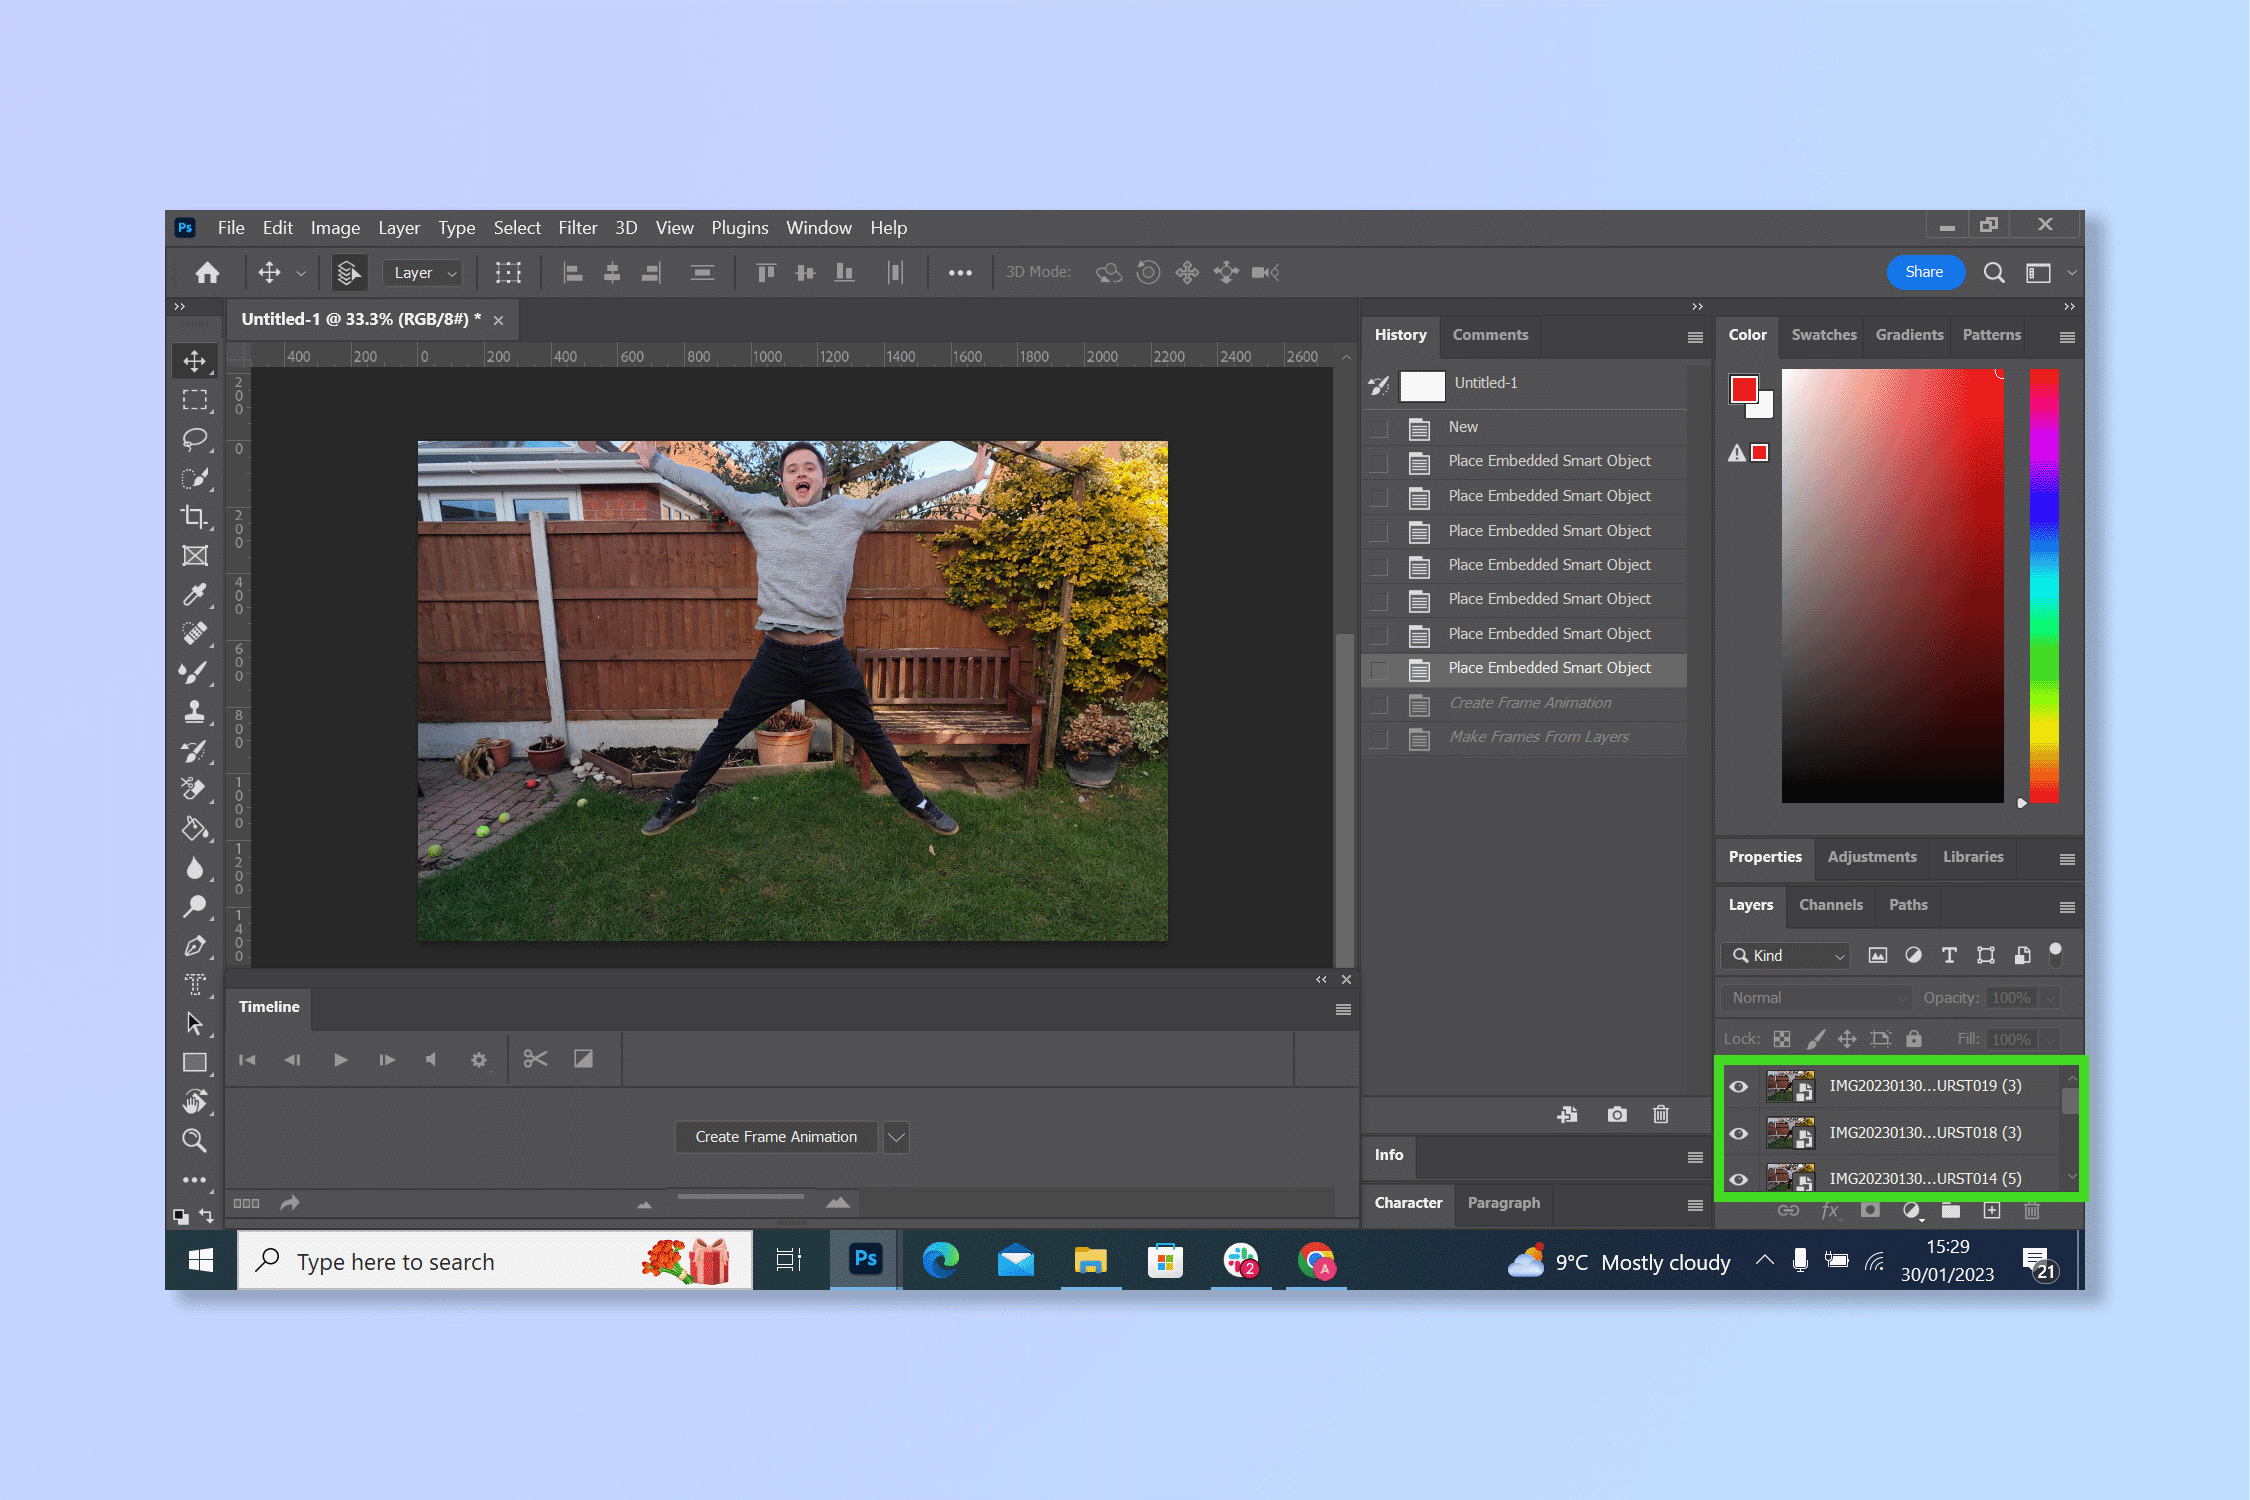 The first step to creating a GIF on photoshop